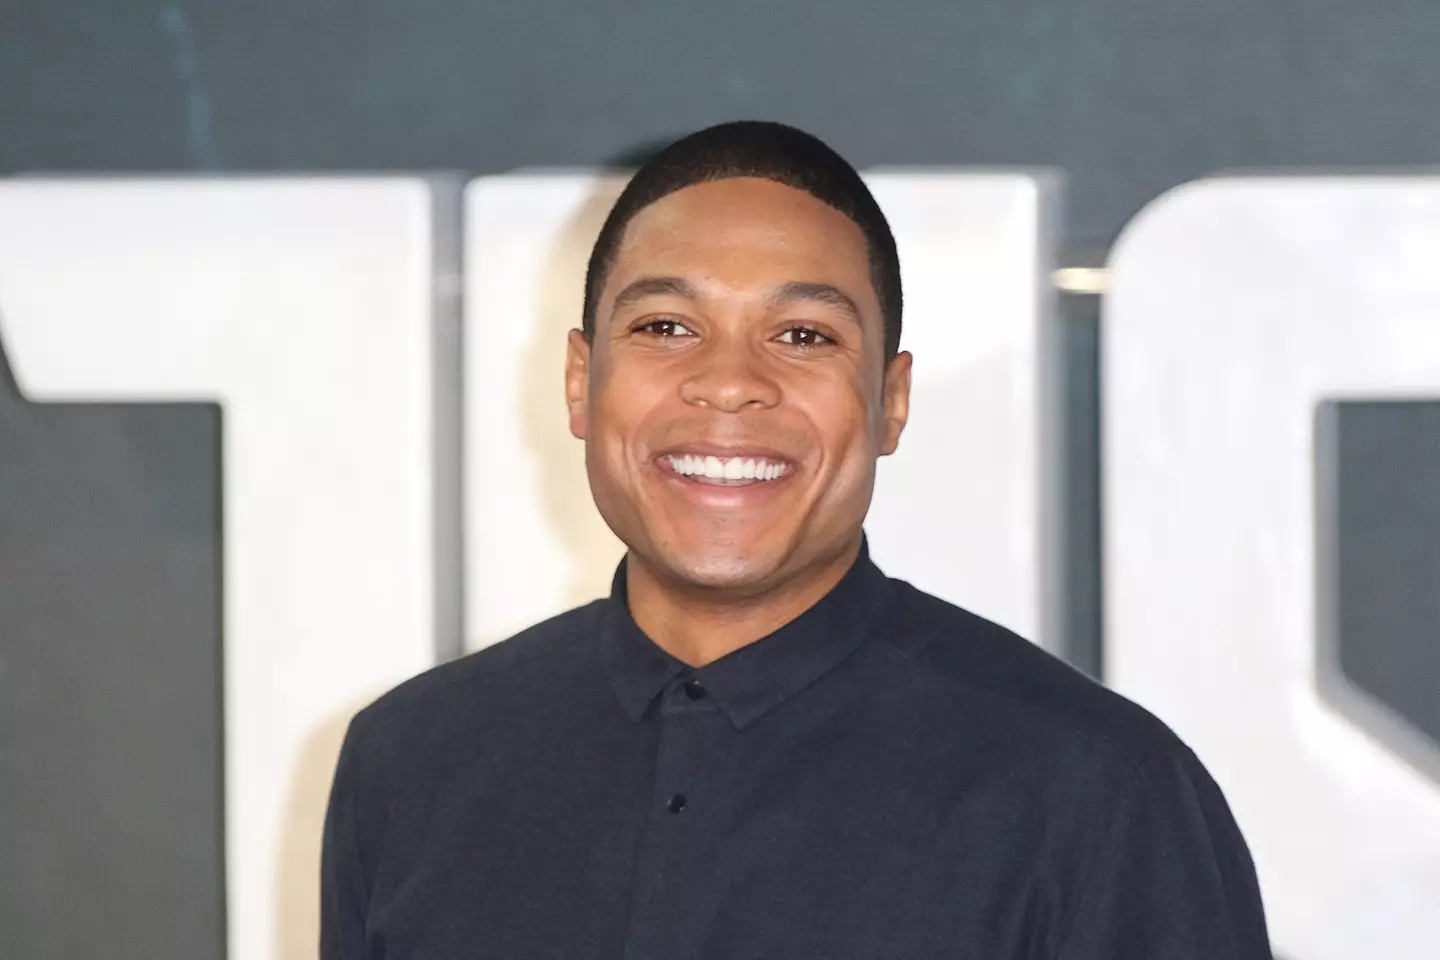 Ray Fisher's accusations stemmed from 2018 claims about Joss Whedon.